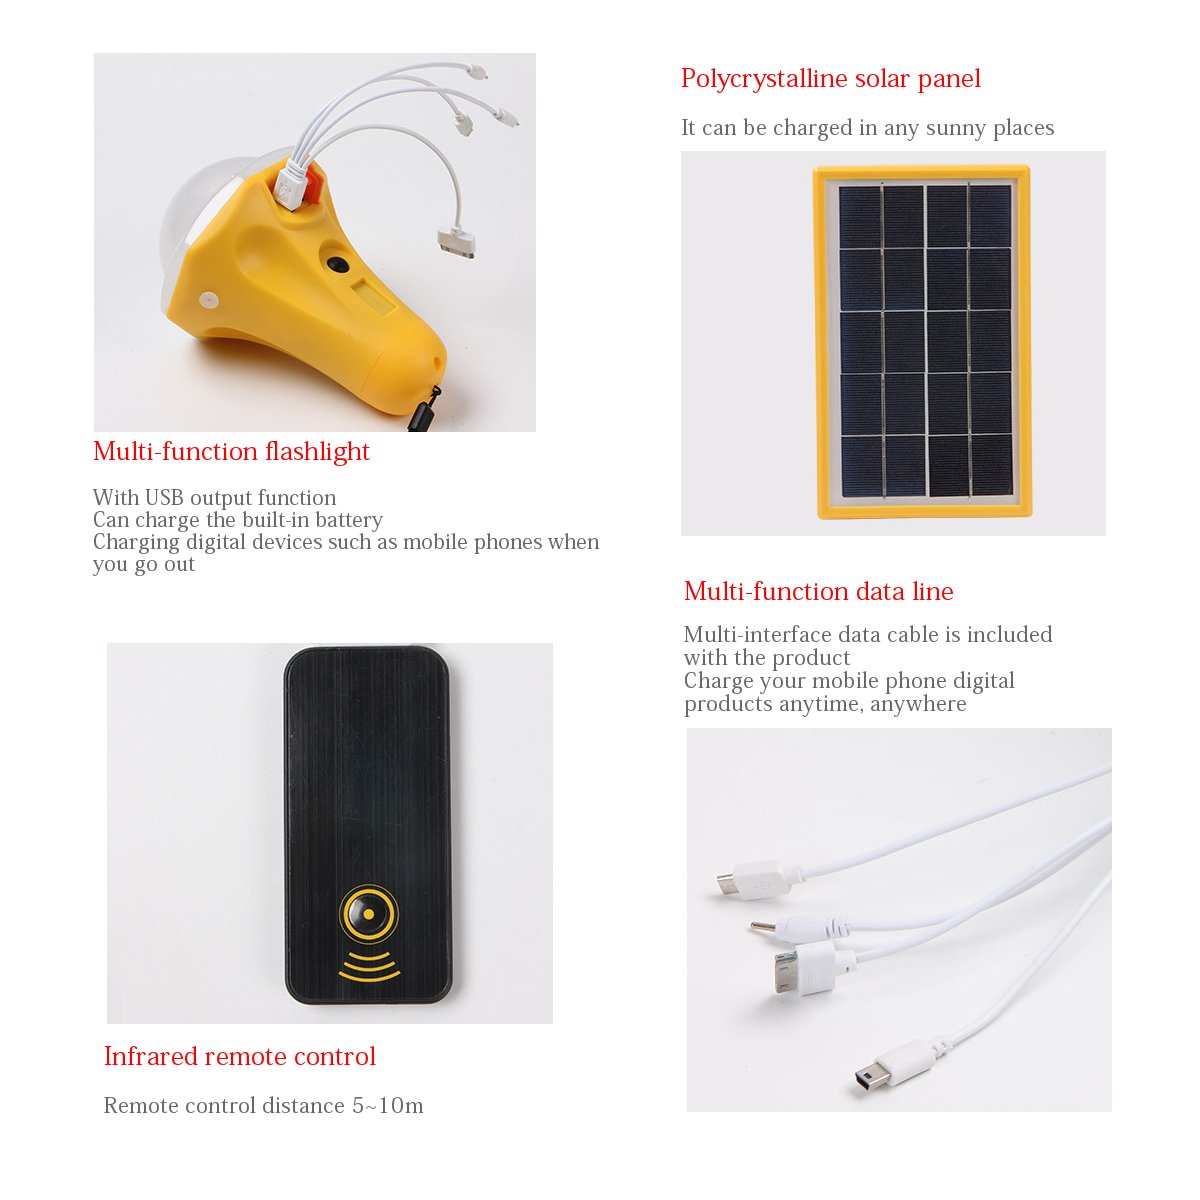 200LM-Solar-Panel-Bulb-Power-5-Modes-DC-Lighting-System-Kits-Emergency-Generator-With-Remote-Control-1460417-4